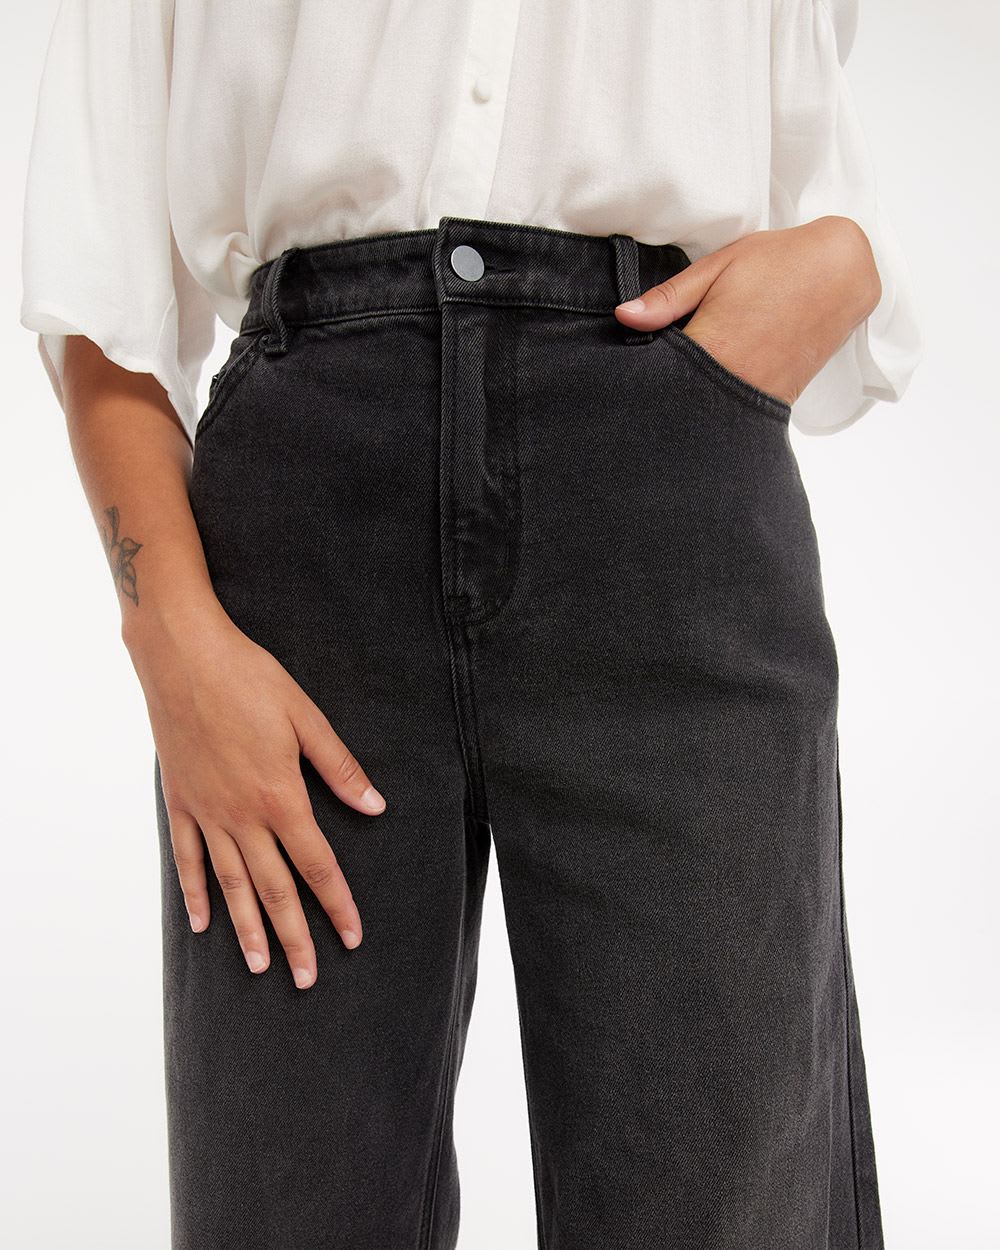 Super High-Rise Faded Black Jean with Wide Leg - Tall